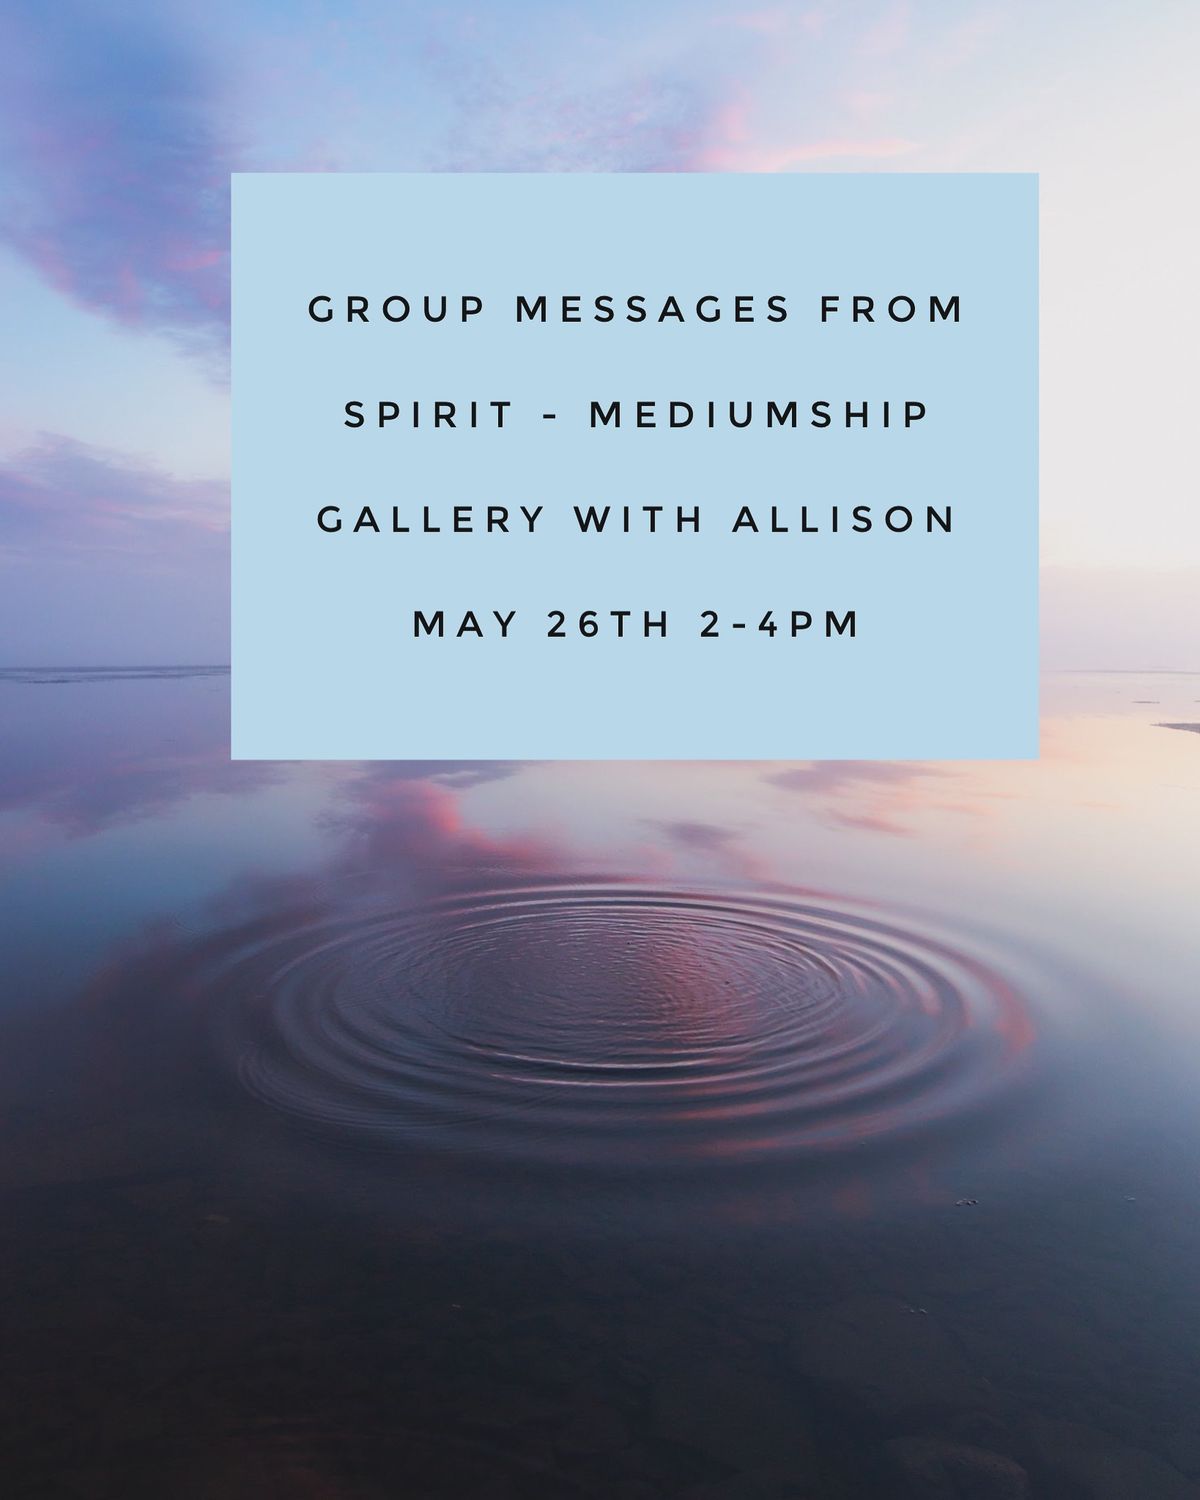 Group Messages from Spirit - Mediumship Gallery with Allison Pilling